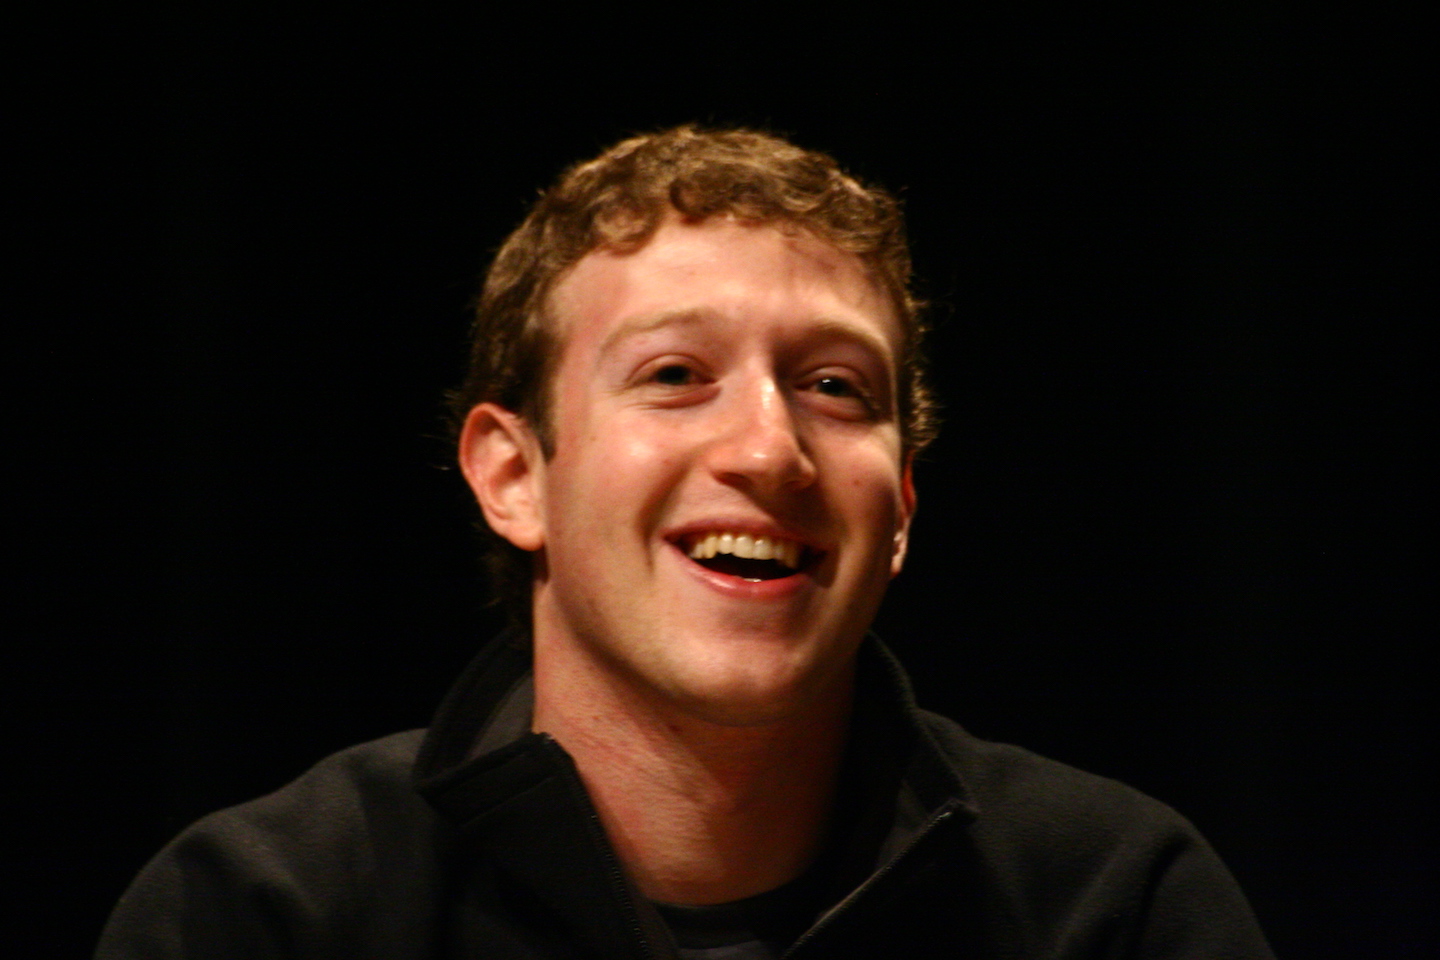 Image: Election interference: Facebook CEO Mark Zuckerberg spent $500 million to influence Democrat election officials and unlawfully change the election system